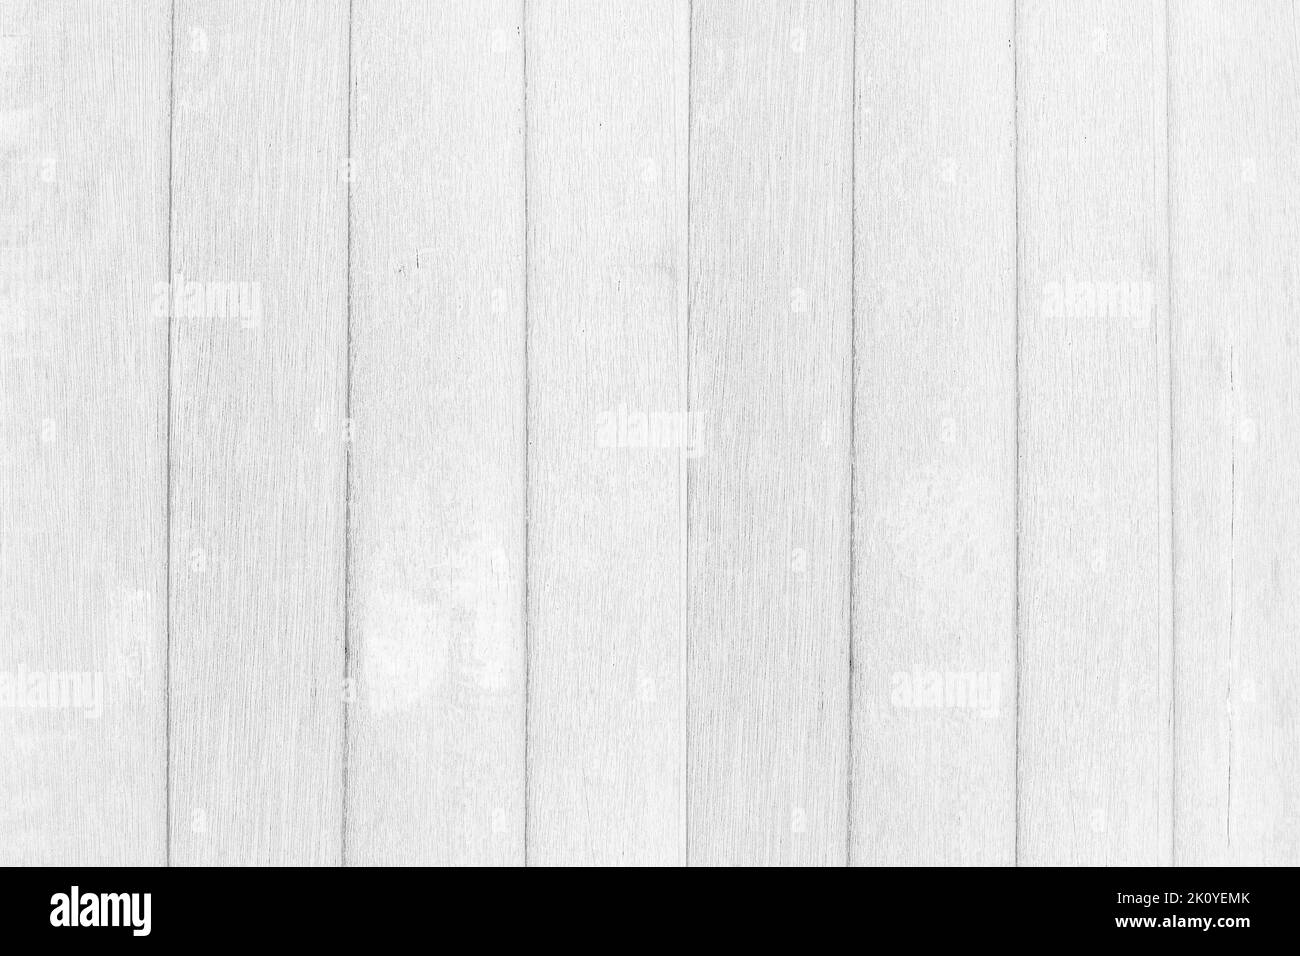 Old white wood plank texture background. Top view of white wooden table Stock Photo